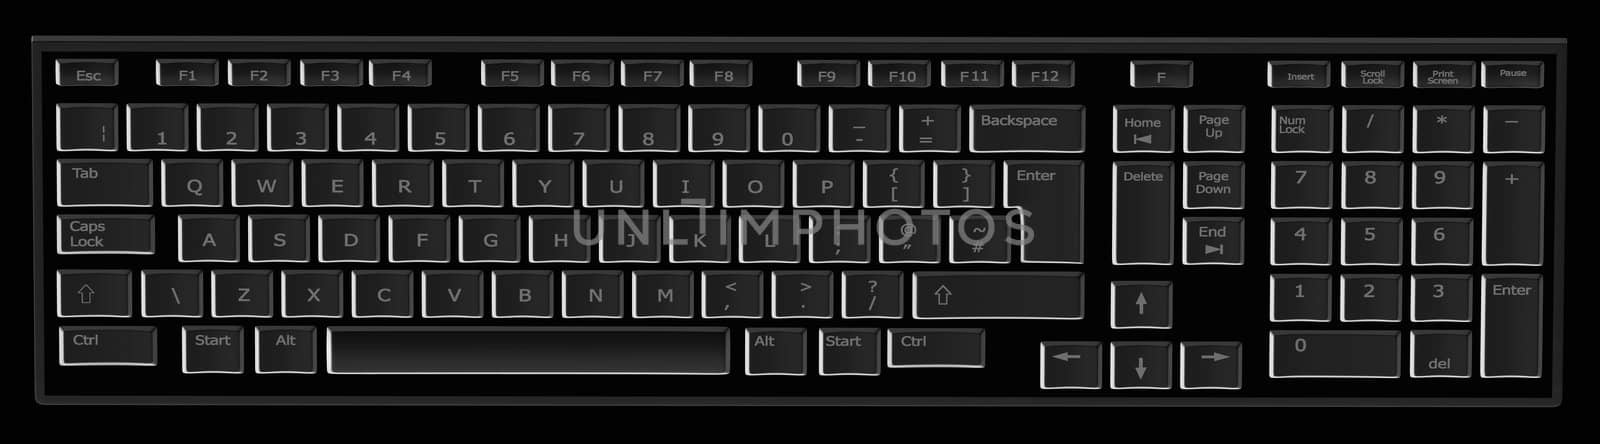 Computer keyboard in black and grey by marphotography